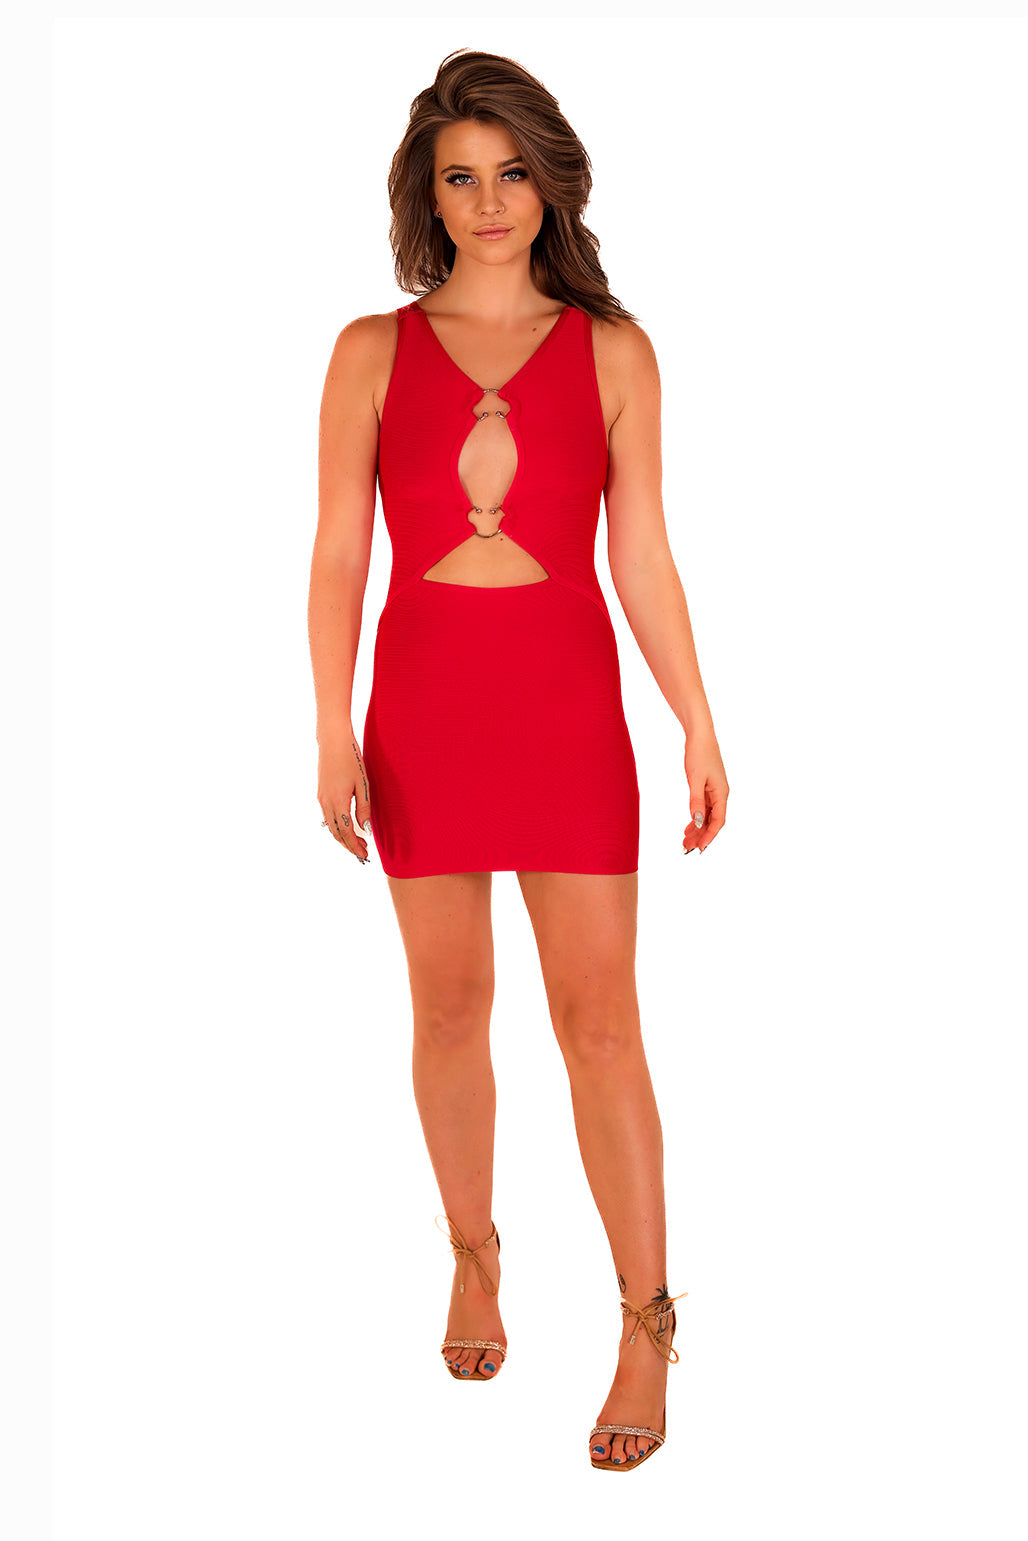 Sexy Red Bodycon Smoothing High Neck Mini Dress with Trending Cutouts and Silver Heart O-Rings